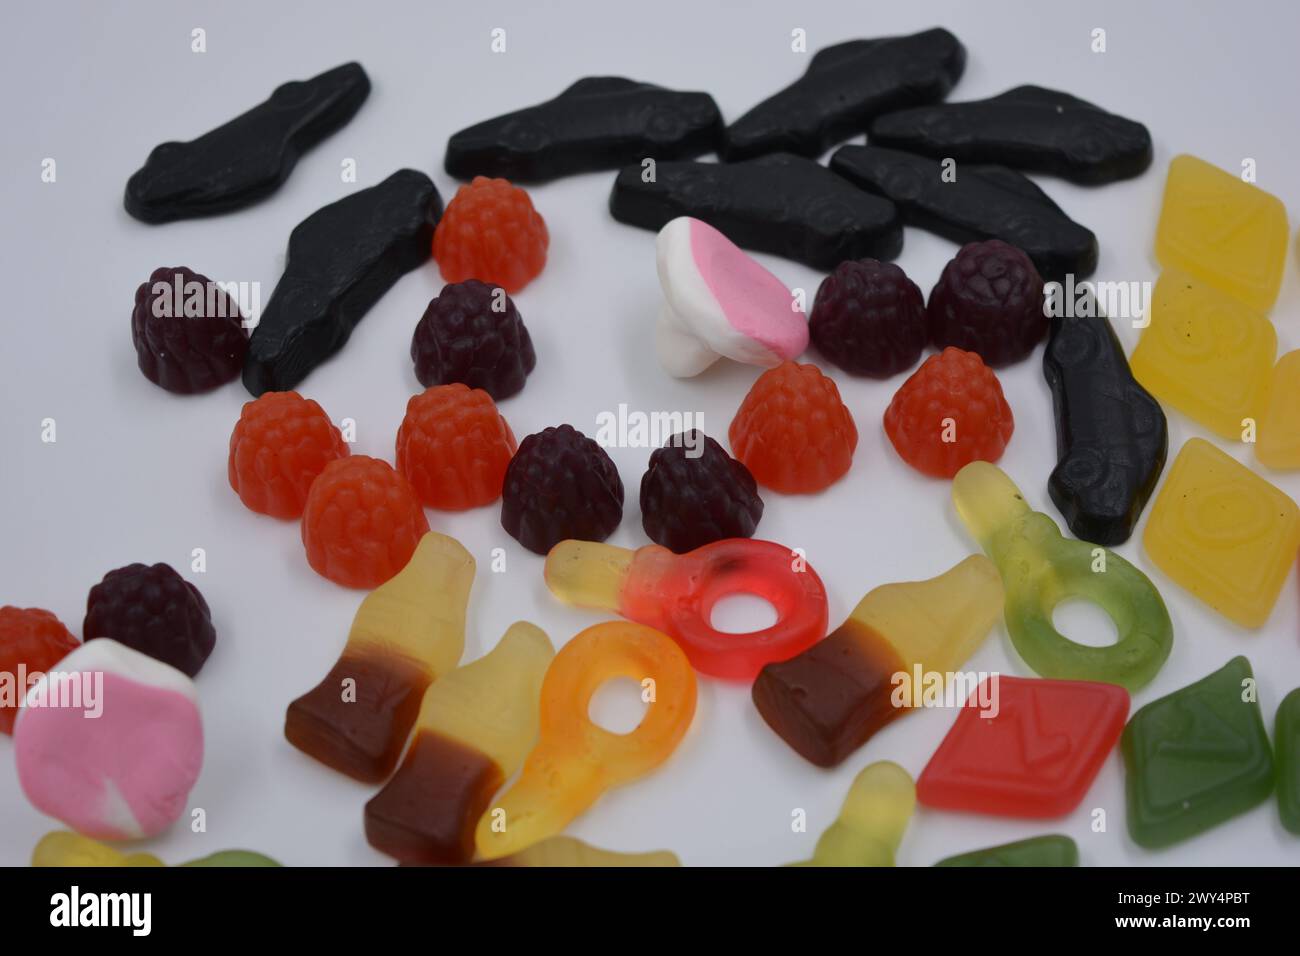 Candies in the form of a black car, raspberries, blackberries, cola bottles, colored keys, diamonds with the alphabet. Stock Photo